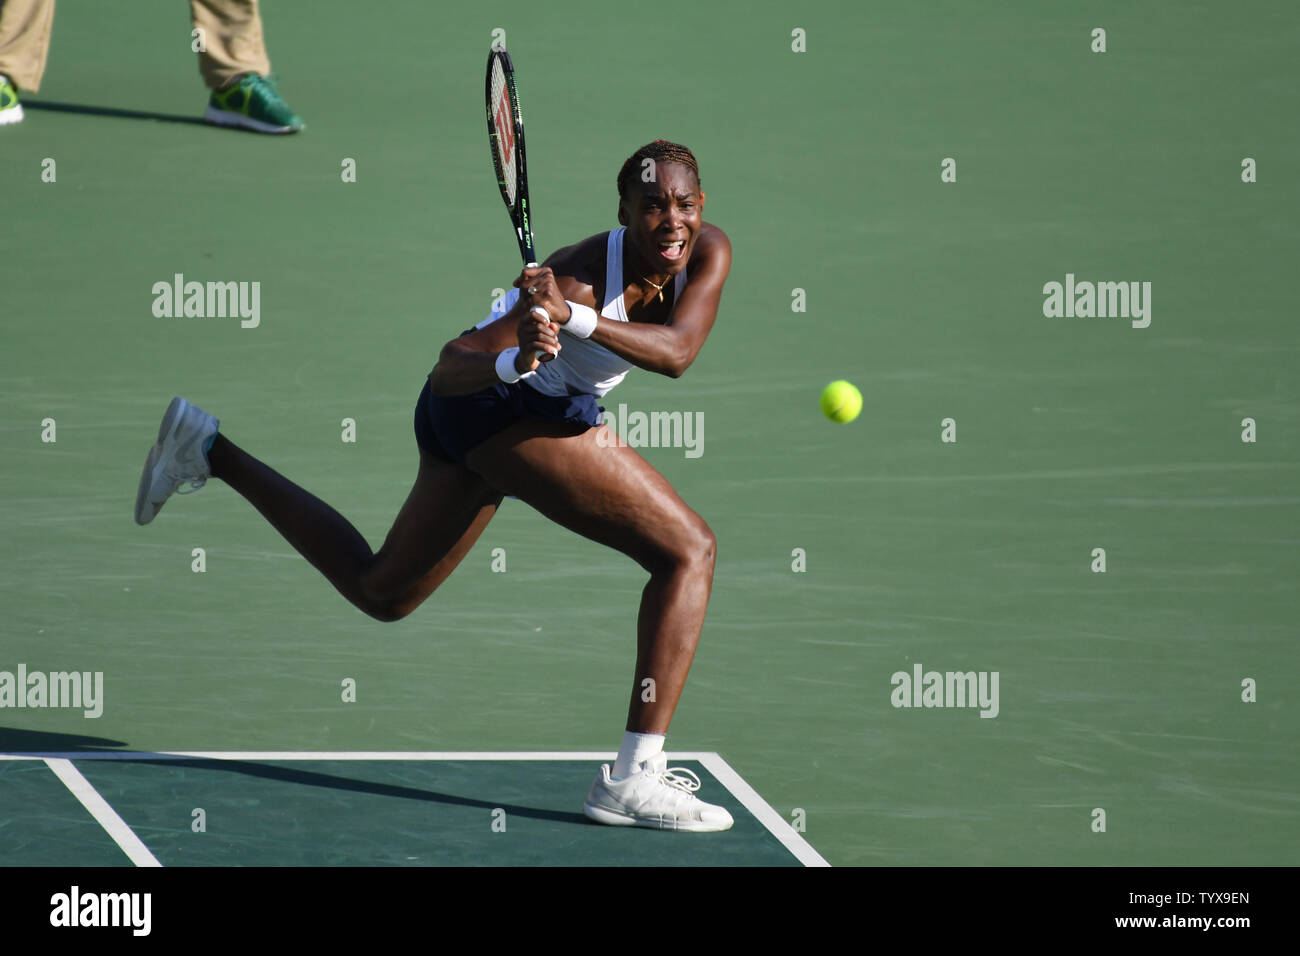 Venus Williams of the United States returns a volley during the Mixed Doubles Gold Medal Tennis Match at the Olympic Tennis Stadium at the 2016 Rio Summer Olympics in Rio de Janeiro, Brazil, on August 14, 2016.            Photo by Richard Ellis/UPI.. Stock Photo